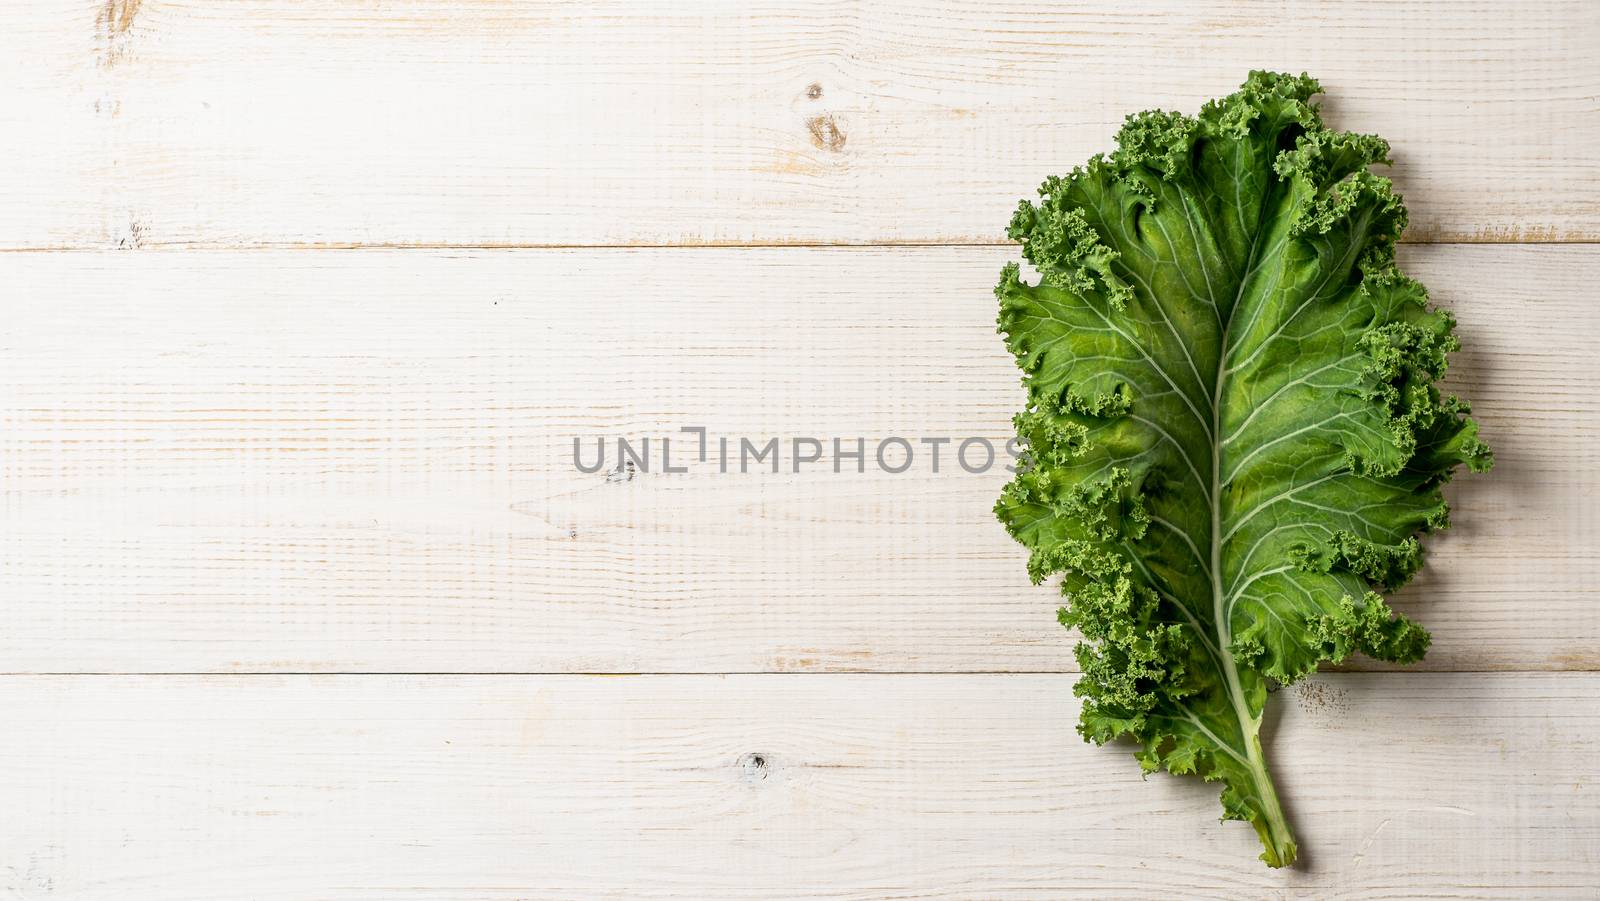 Fresh green kale leaf on white wooden tabletop, copy space left. Flat lay or top view. Healthy detox vegetables. Clean eating and dieting concept. Health kale benefits. Banner